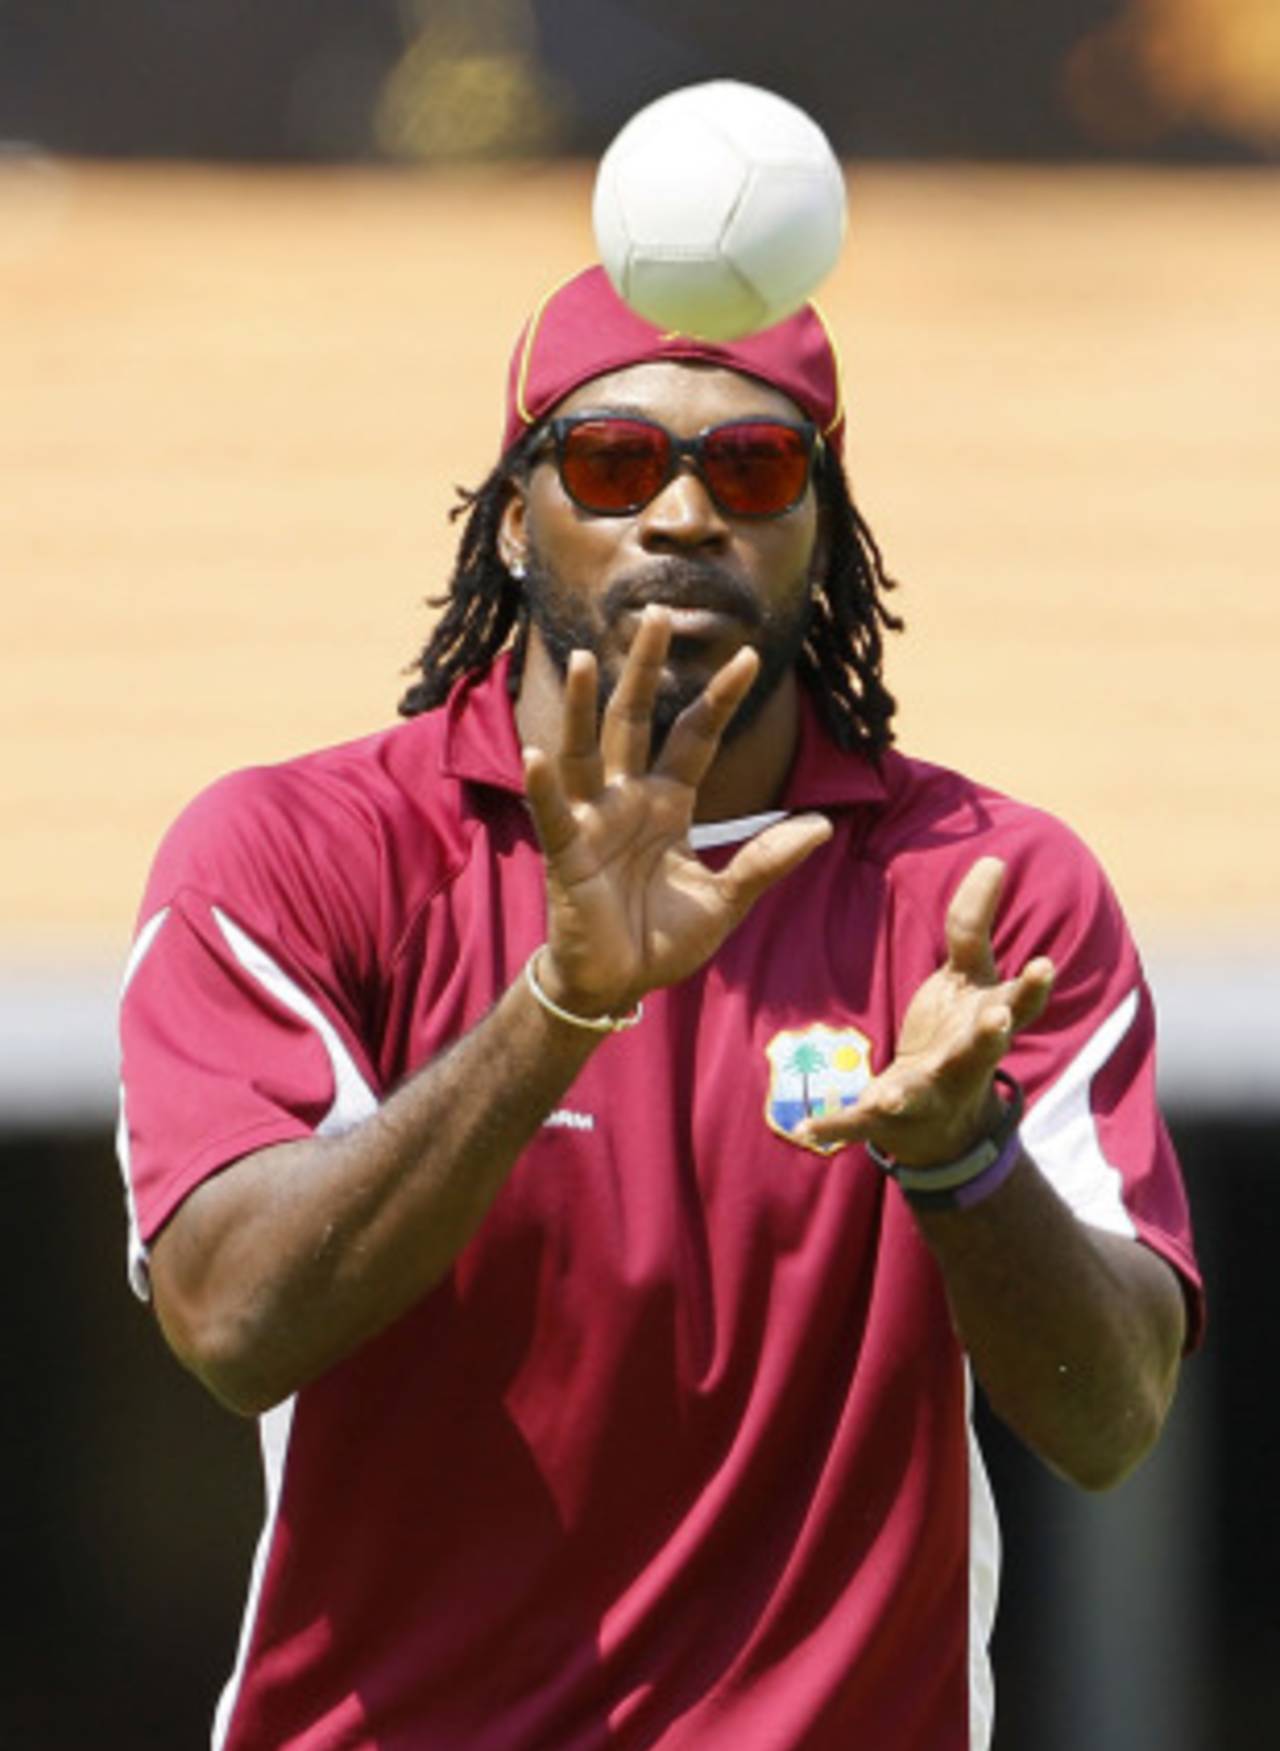 Chirs Gayle in action during a practice session, Chennai, March 16, 2011